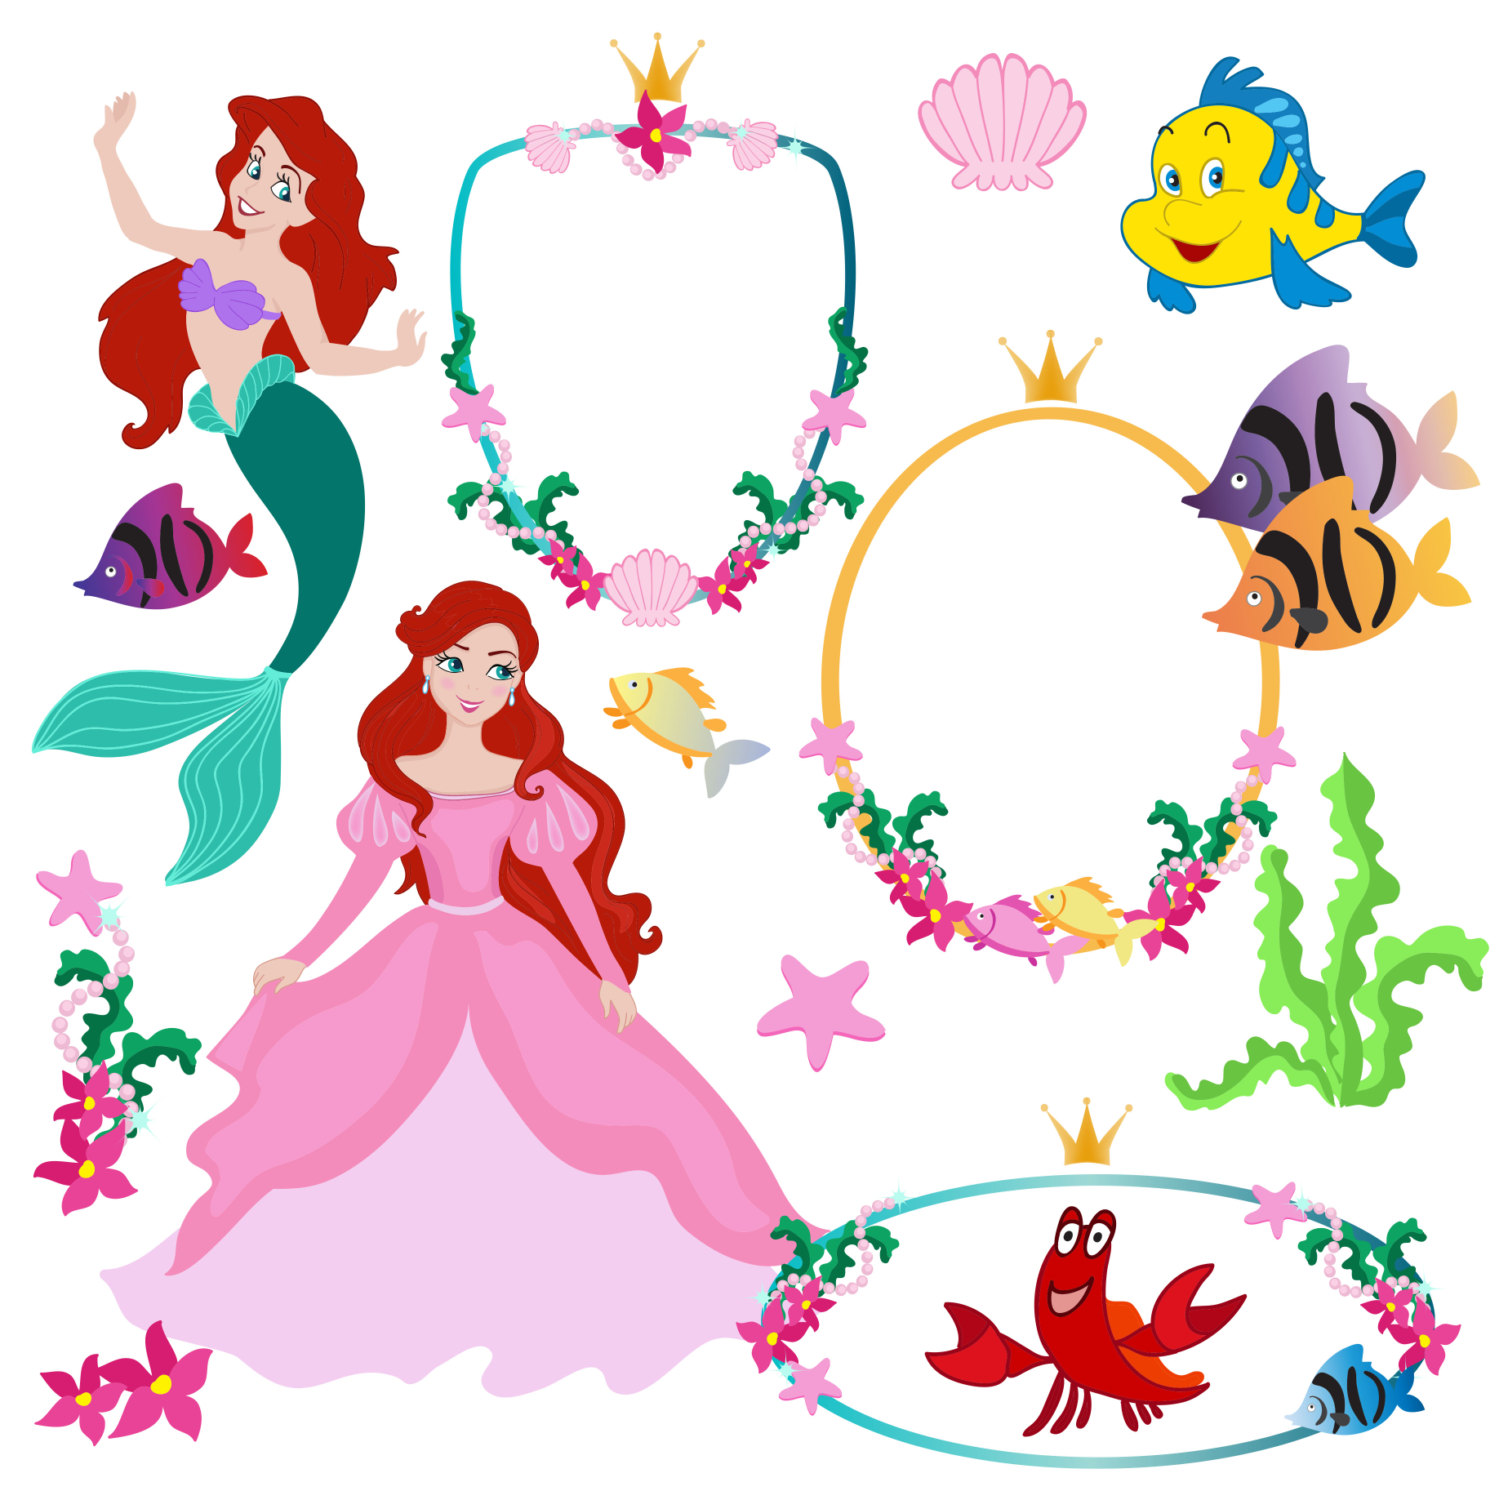 Digital Download Discoveries for PRINCESS CLIPART from EasyPeach.